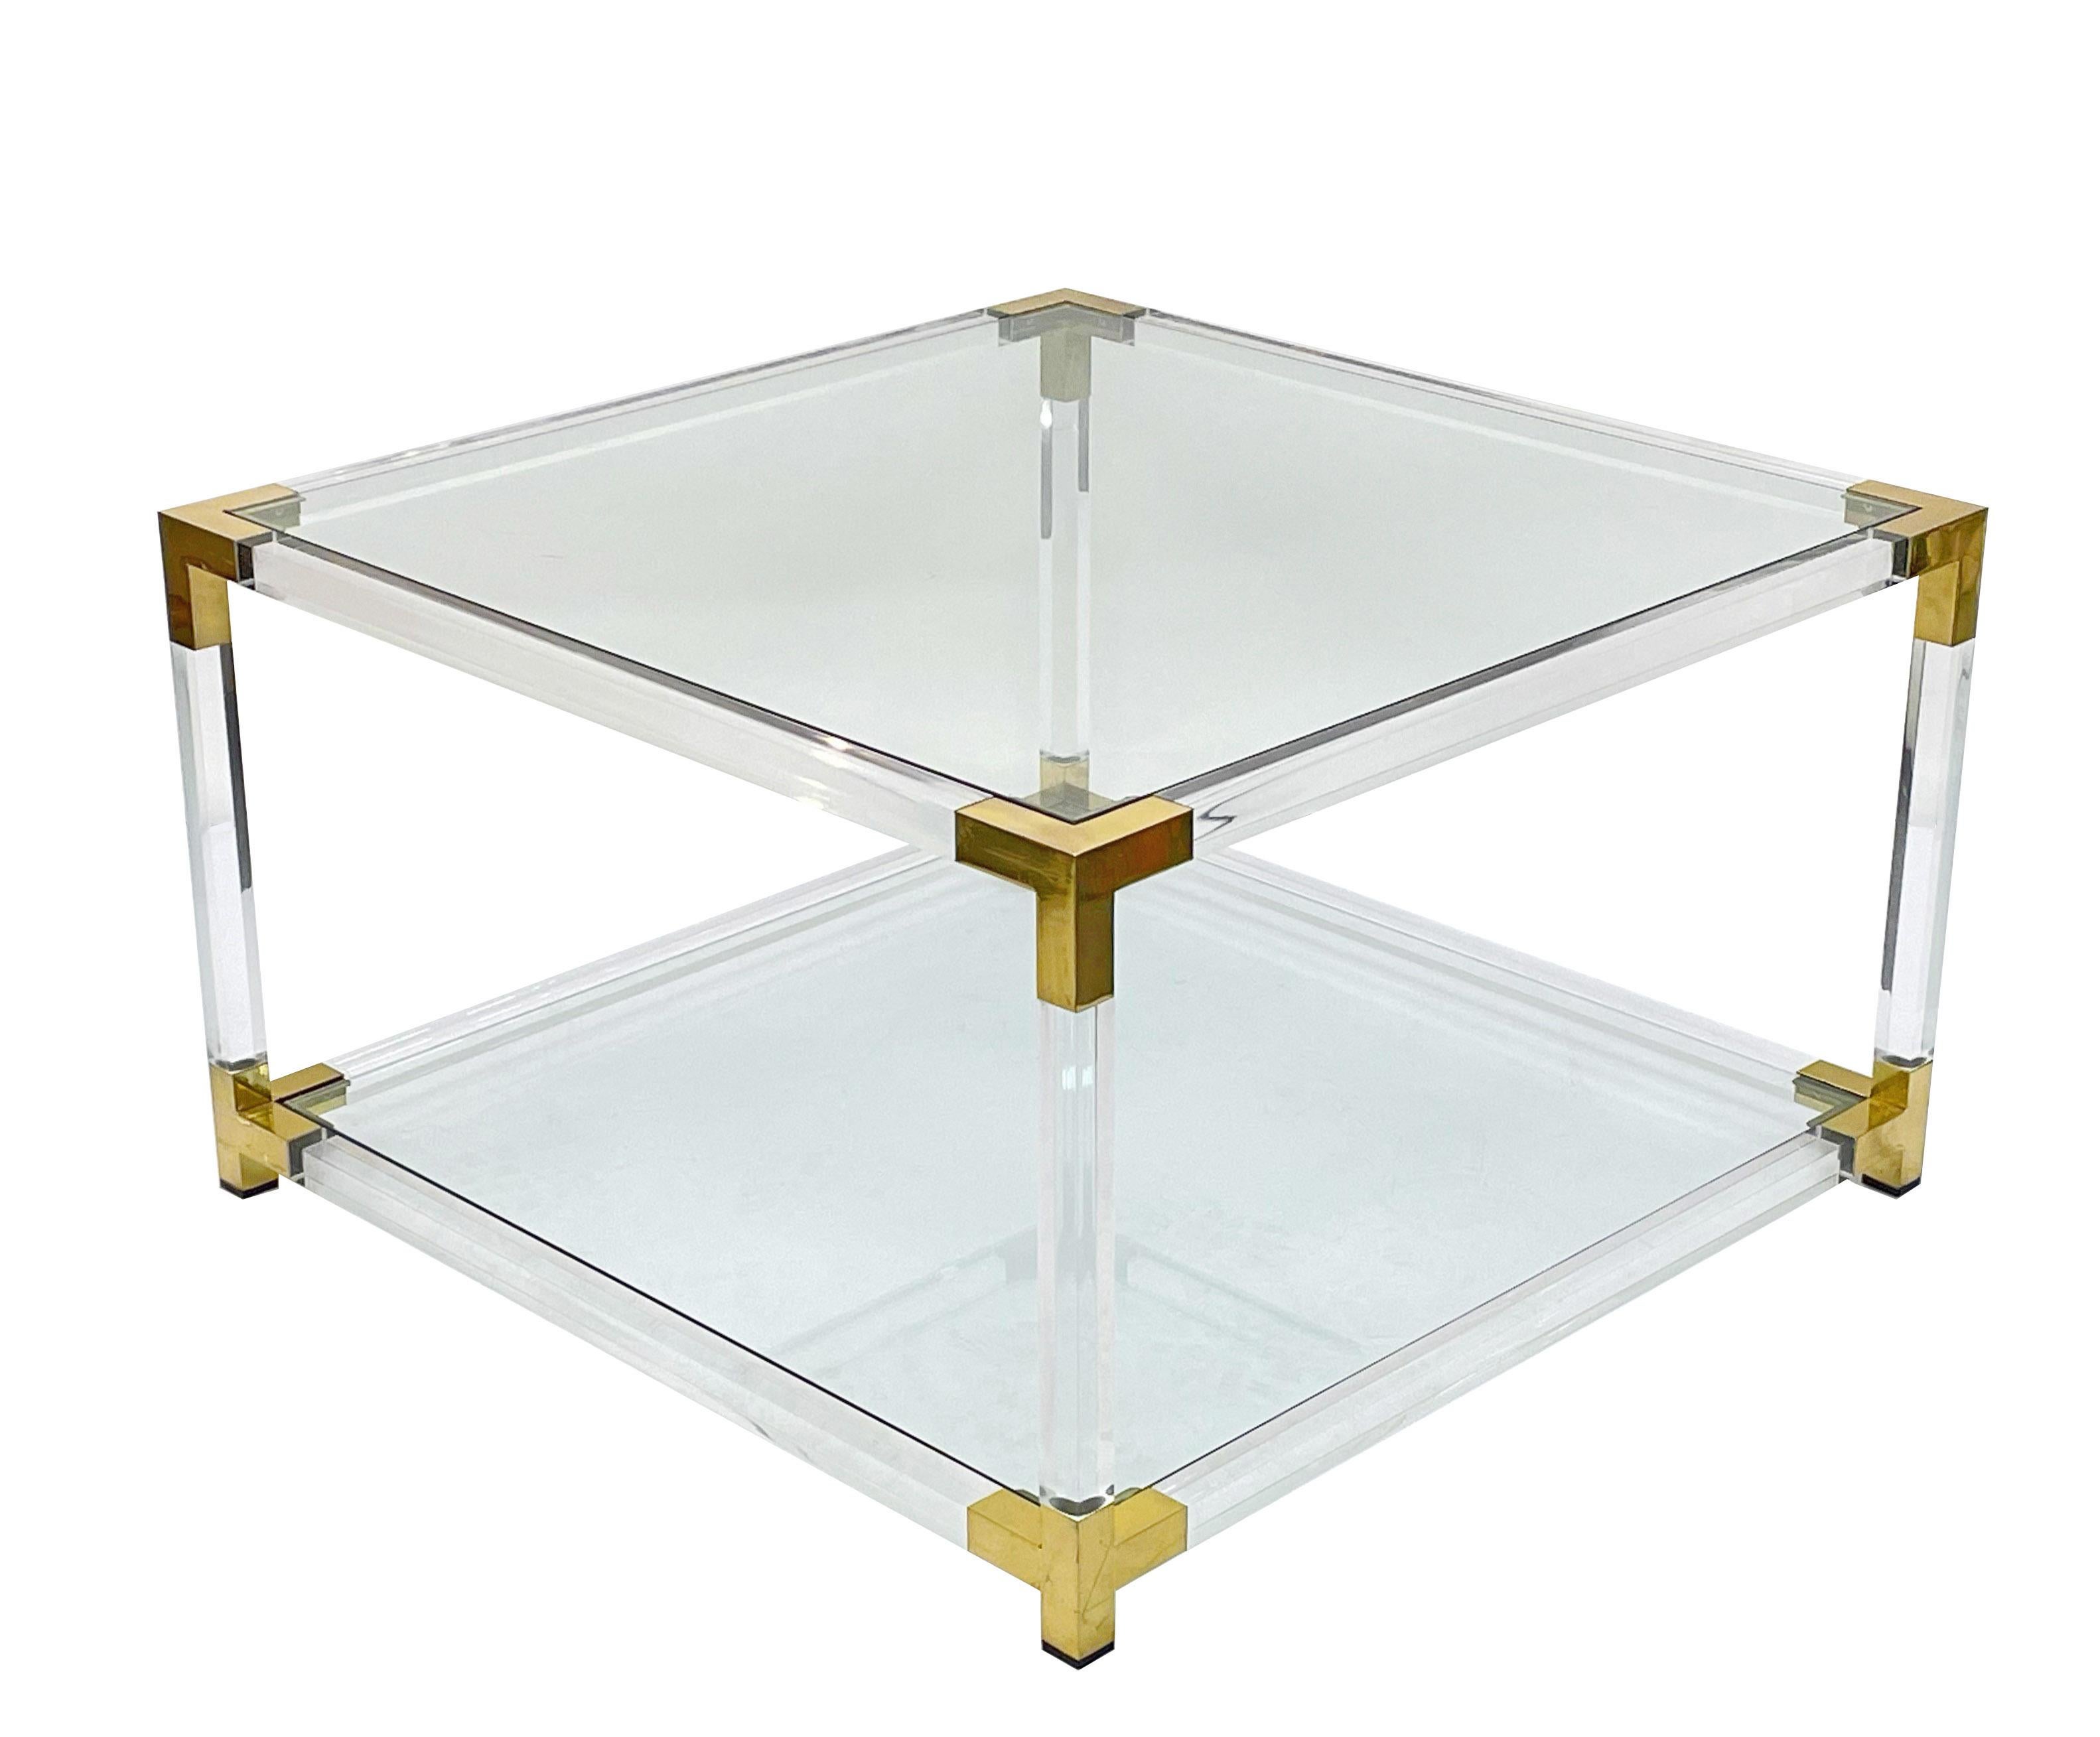 Wonderful mid-century Hollywood Regency coffee or cocktail table with two glass shelves. This amazing table is in the style of Charles Hollis Jones and was produced in Italy during the 1970s.

This piece is fabulous because of its Hollywood